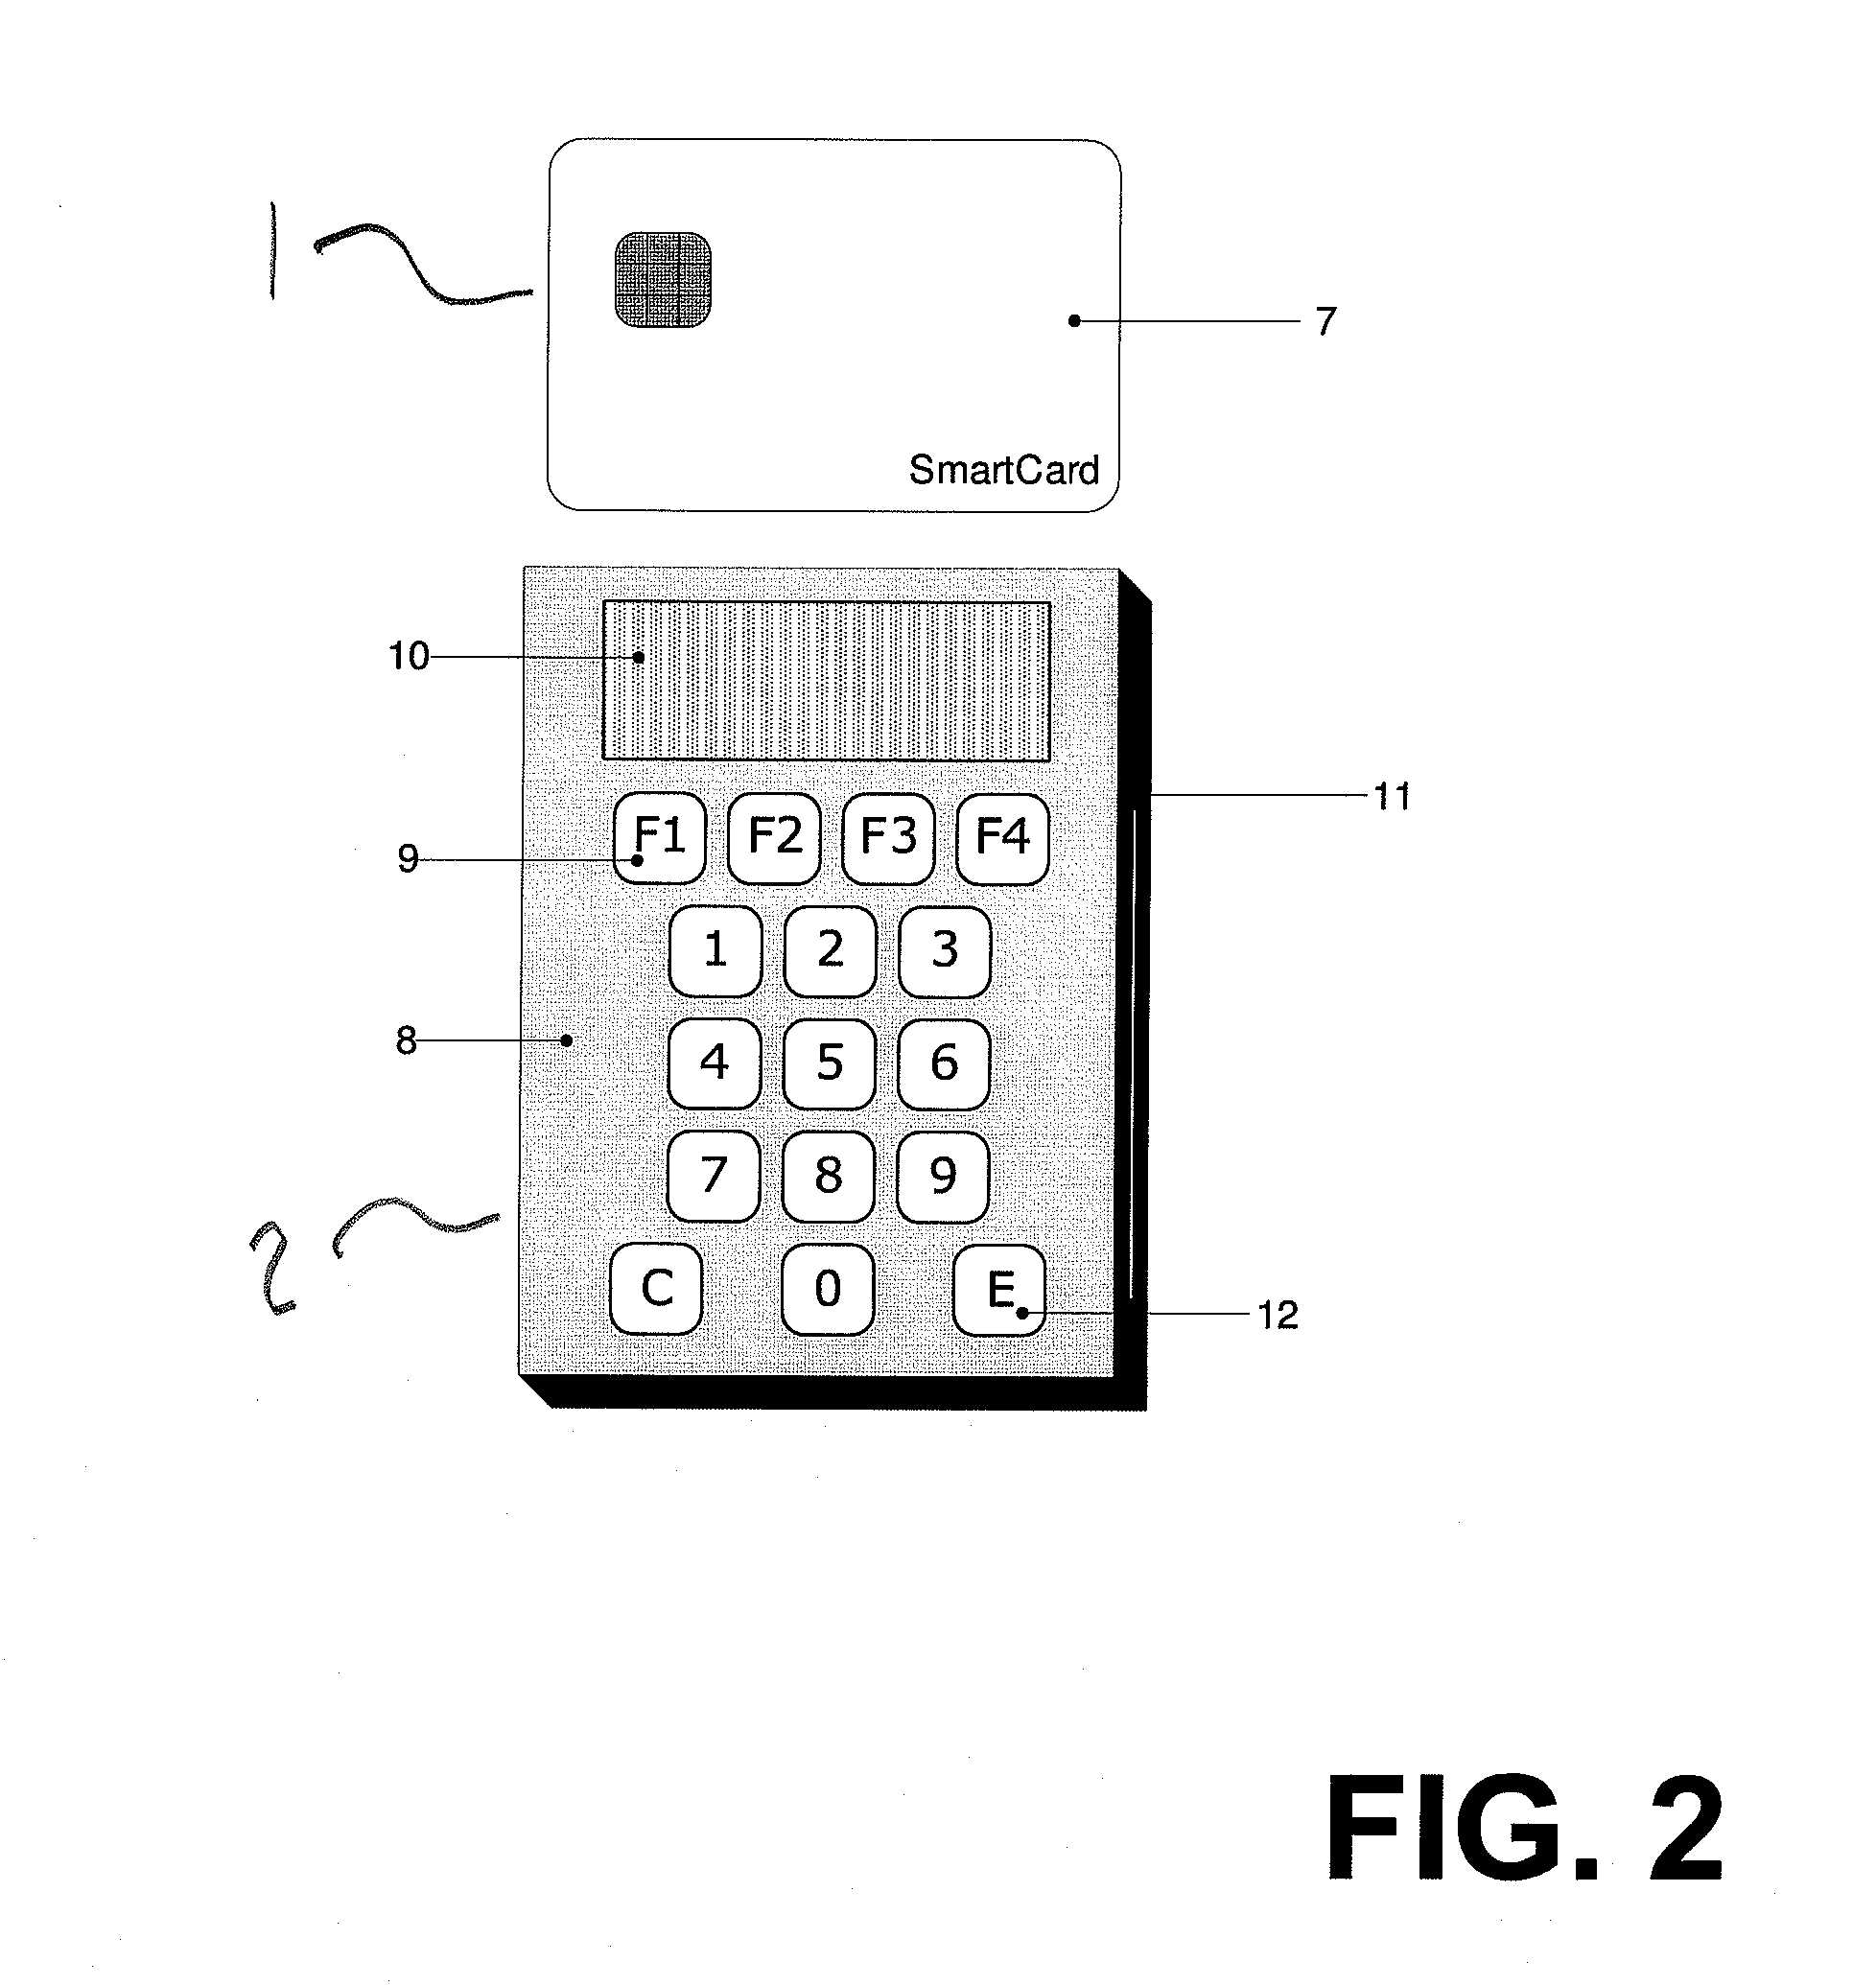 Computer system and method for initiating payments based on cheques